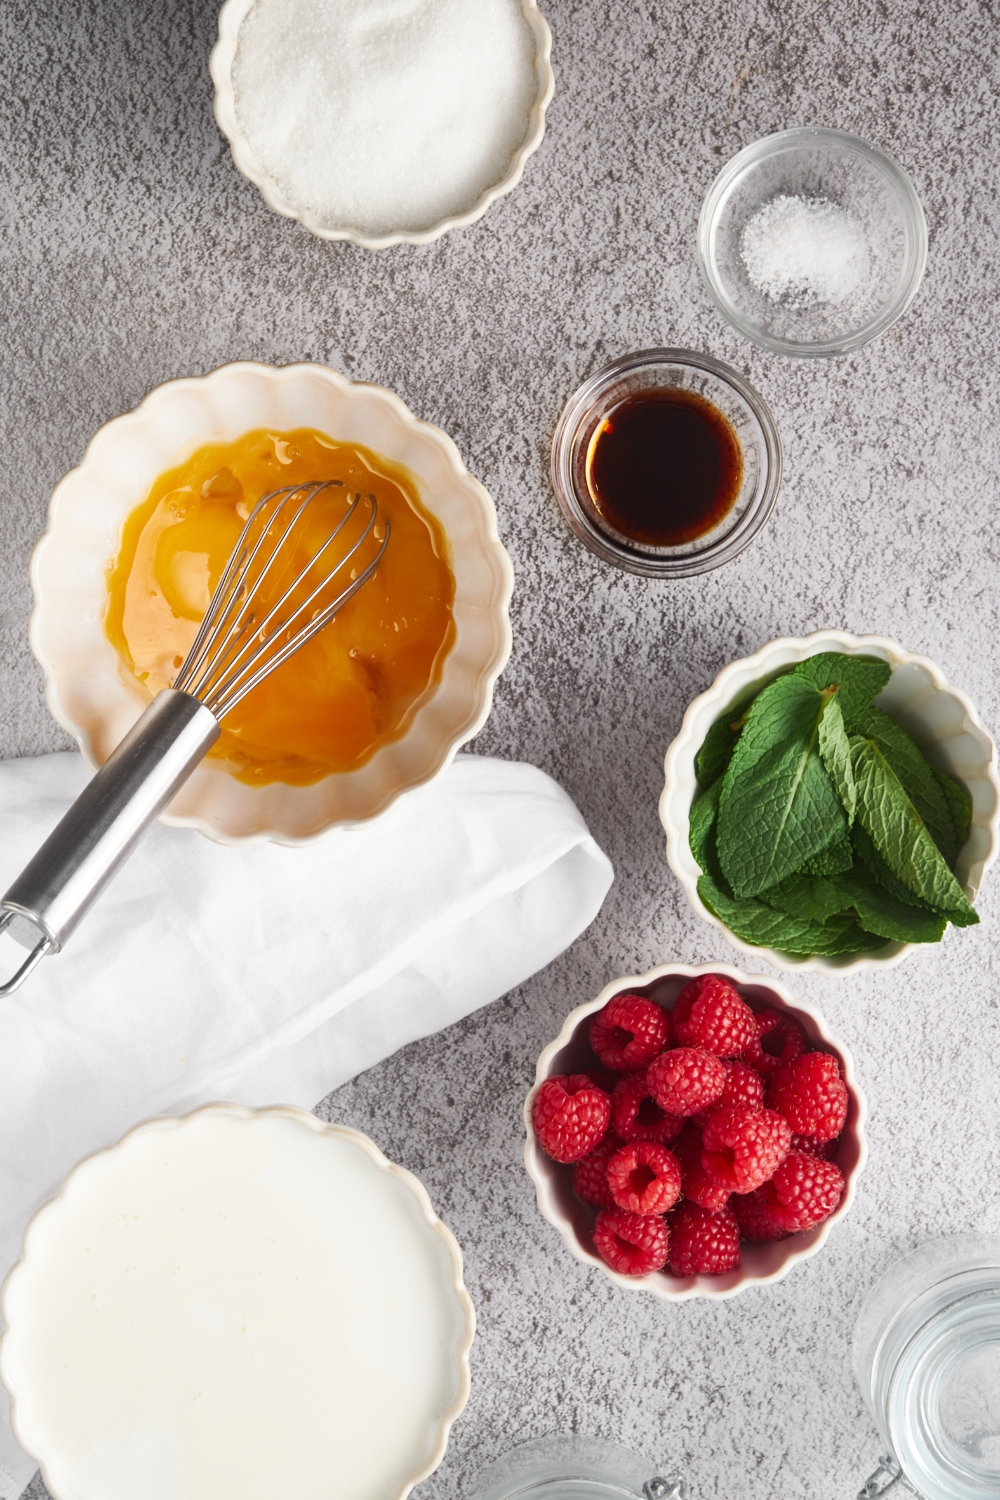 Overhead view of an assortment of ingredients including bowls of mint leaves, raspberries, vanilla extract, whisked eggs, and milk.